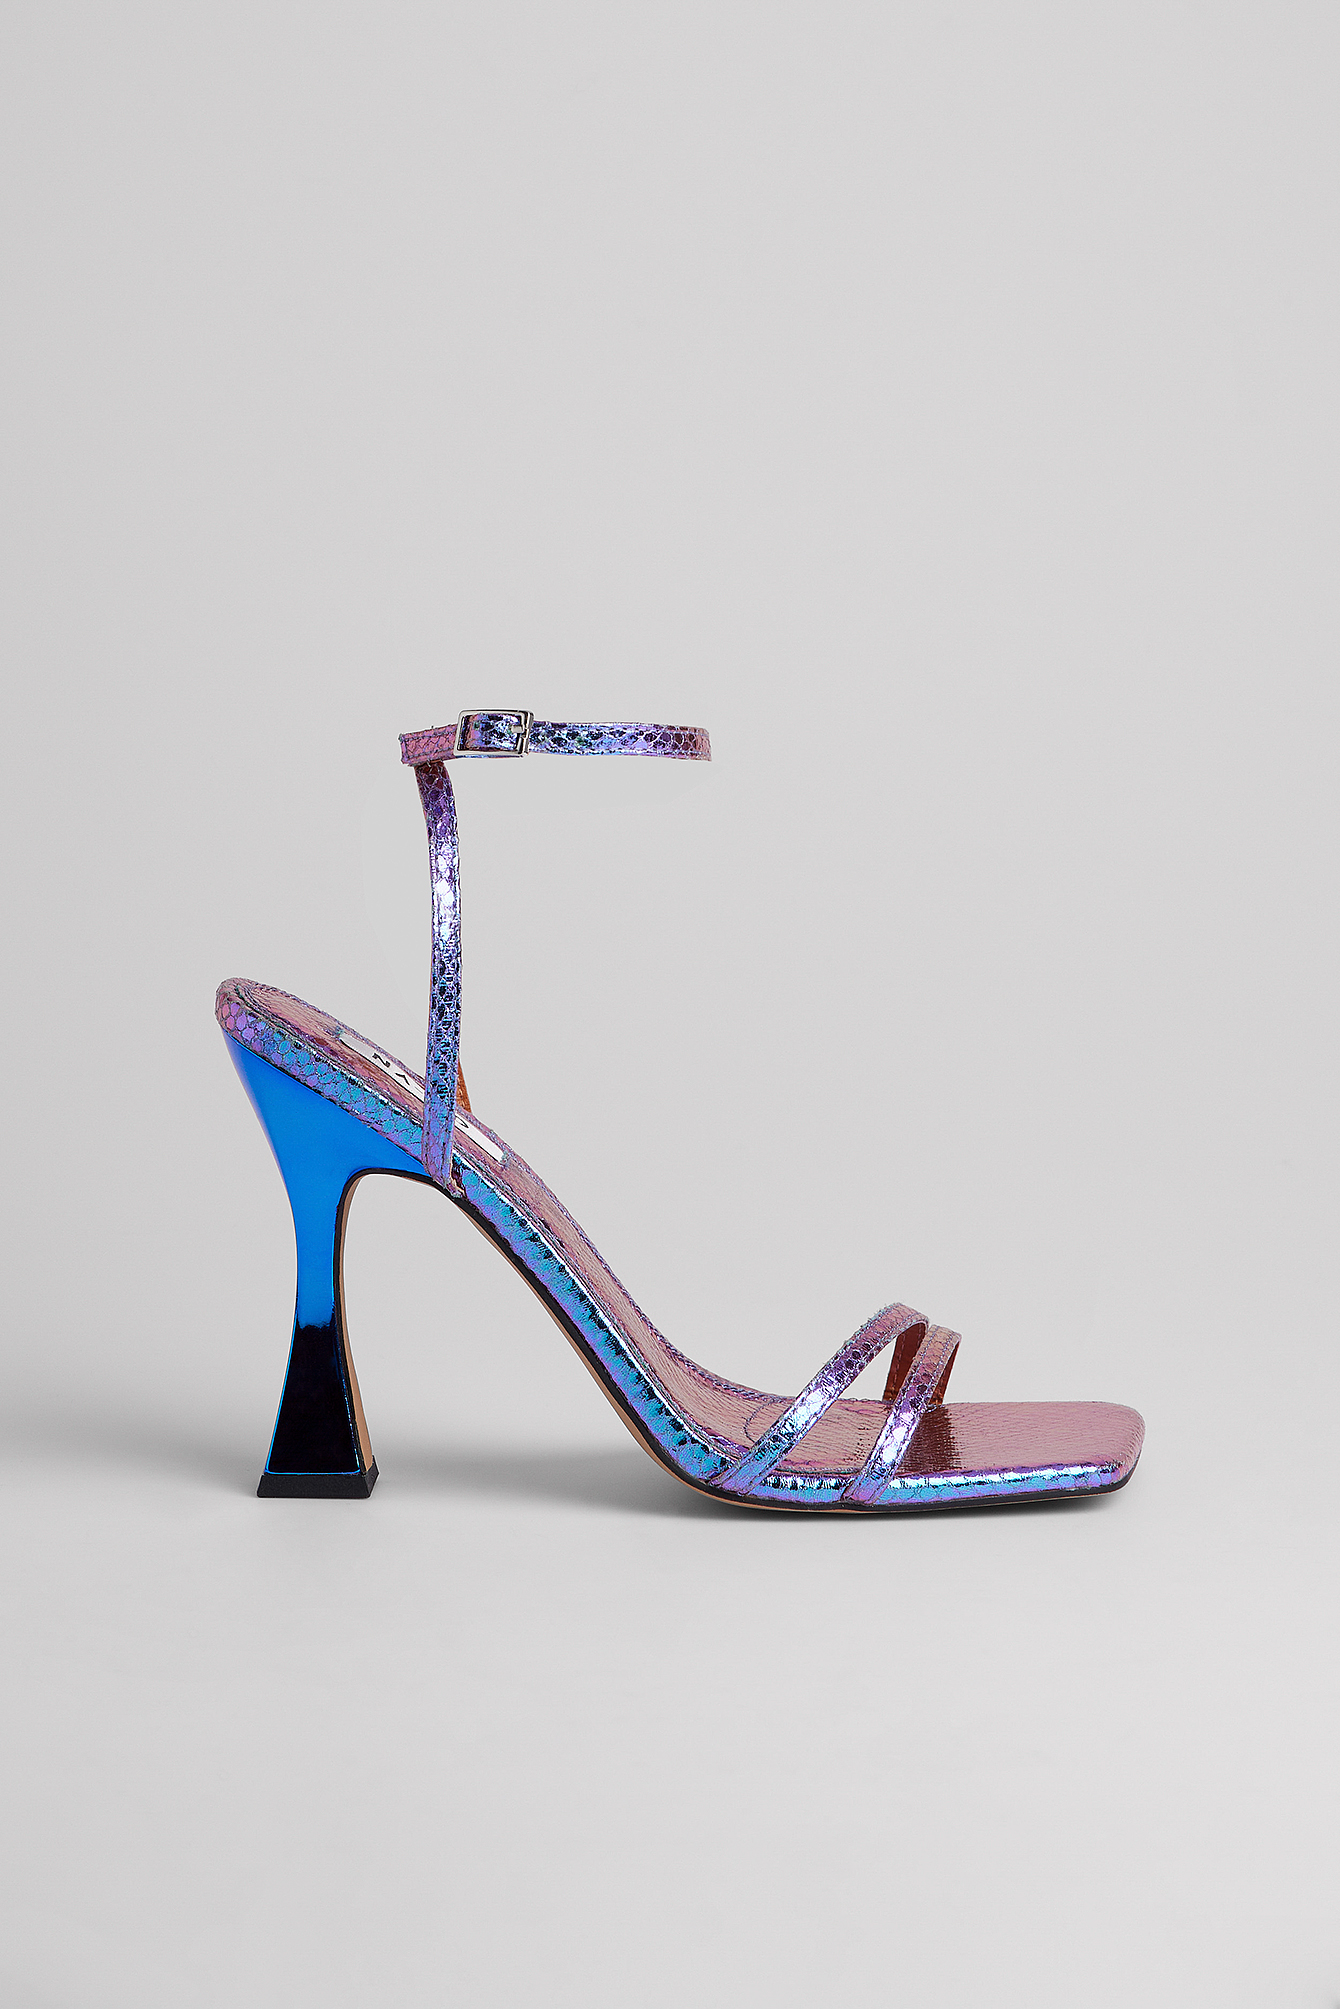 Time to Shine Metallic Heels in Magenta - Frock Candy